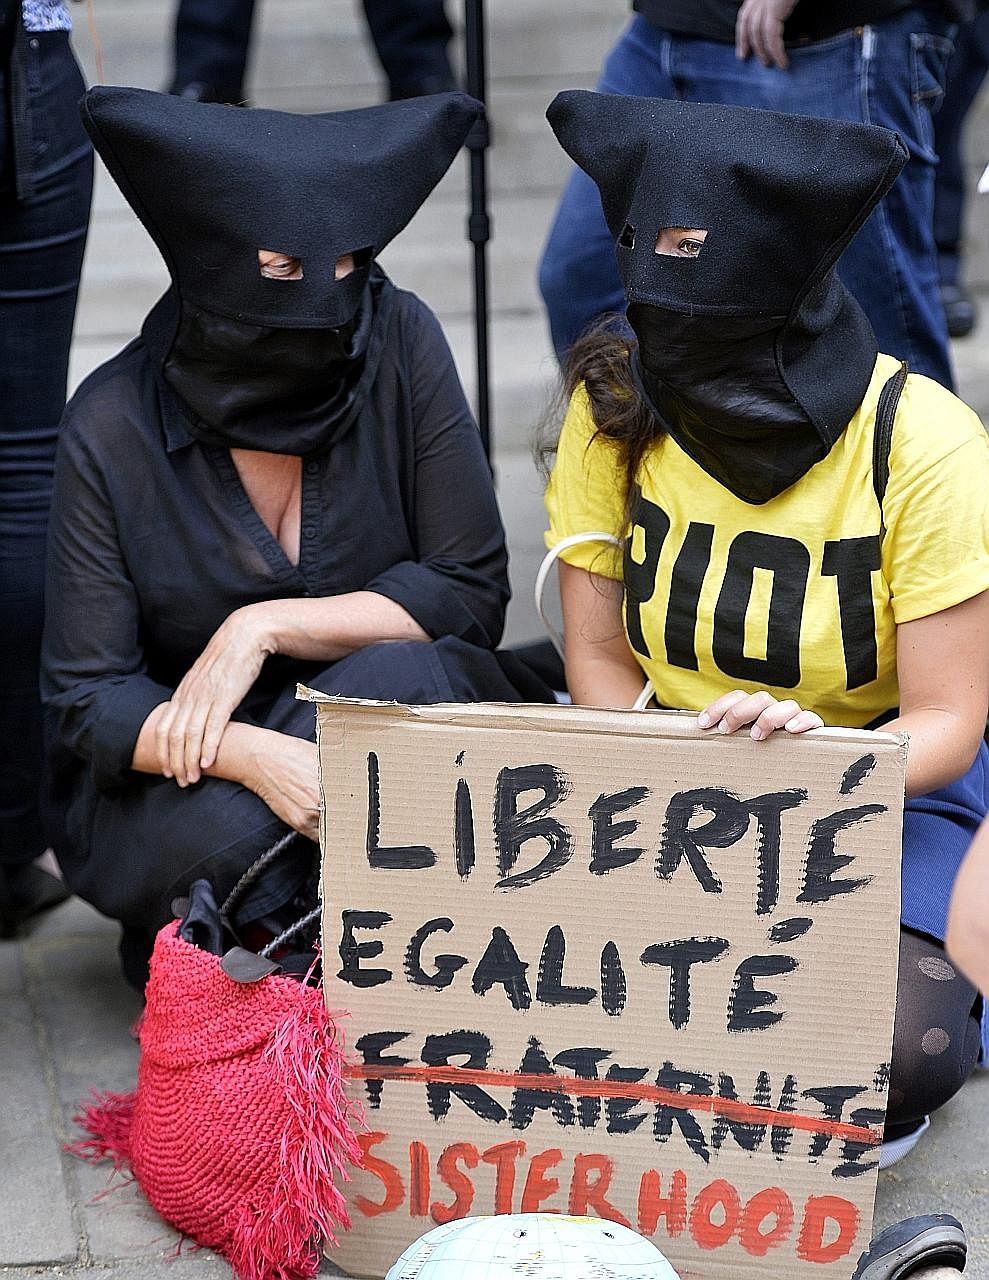 Participants of the Wear What You Want Beach Party protest outside the French Embassy in London. The protest against the burkini ban was held to show solidarity with Muslim women in France.